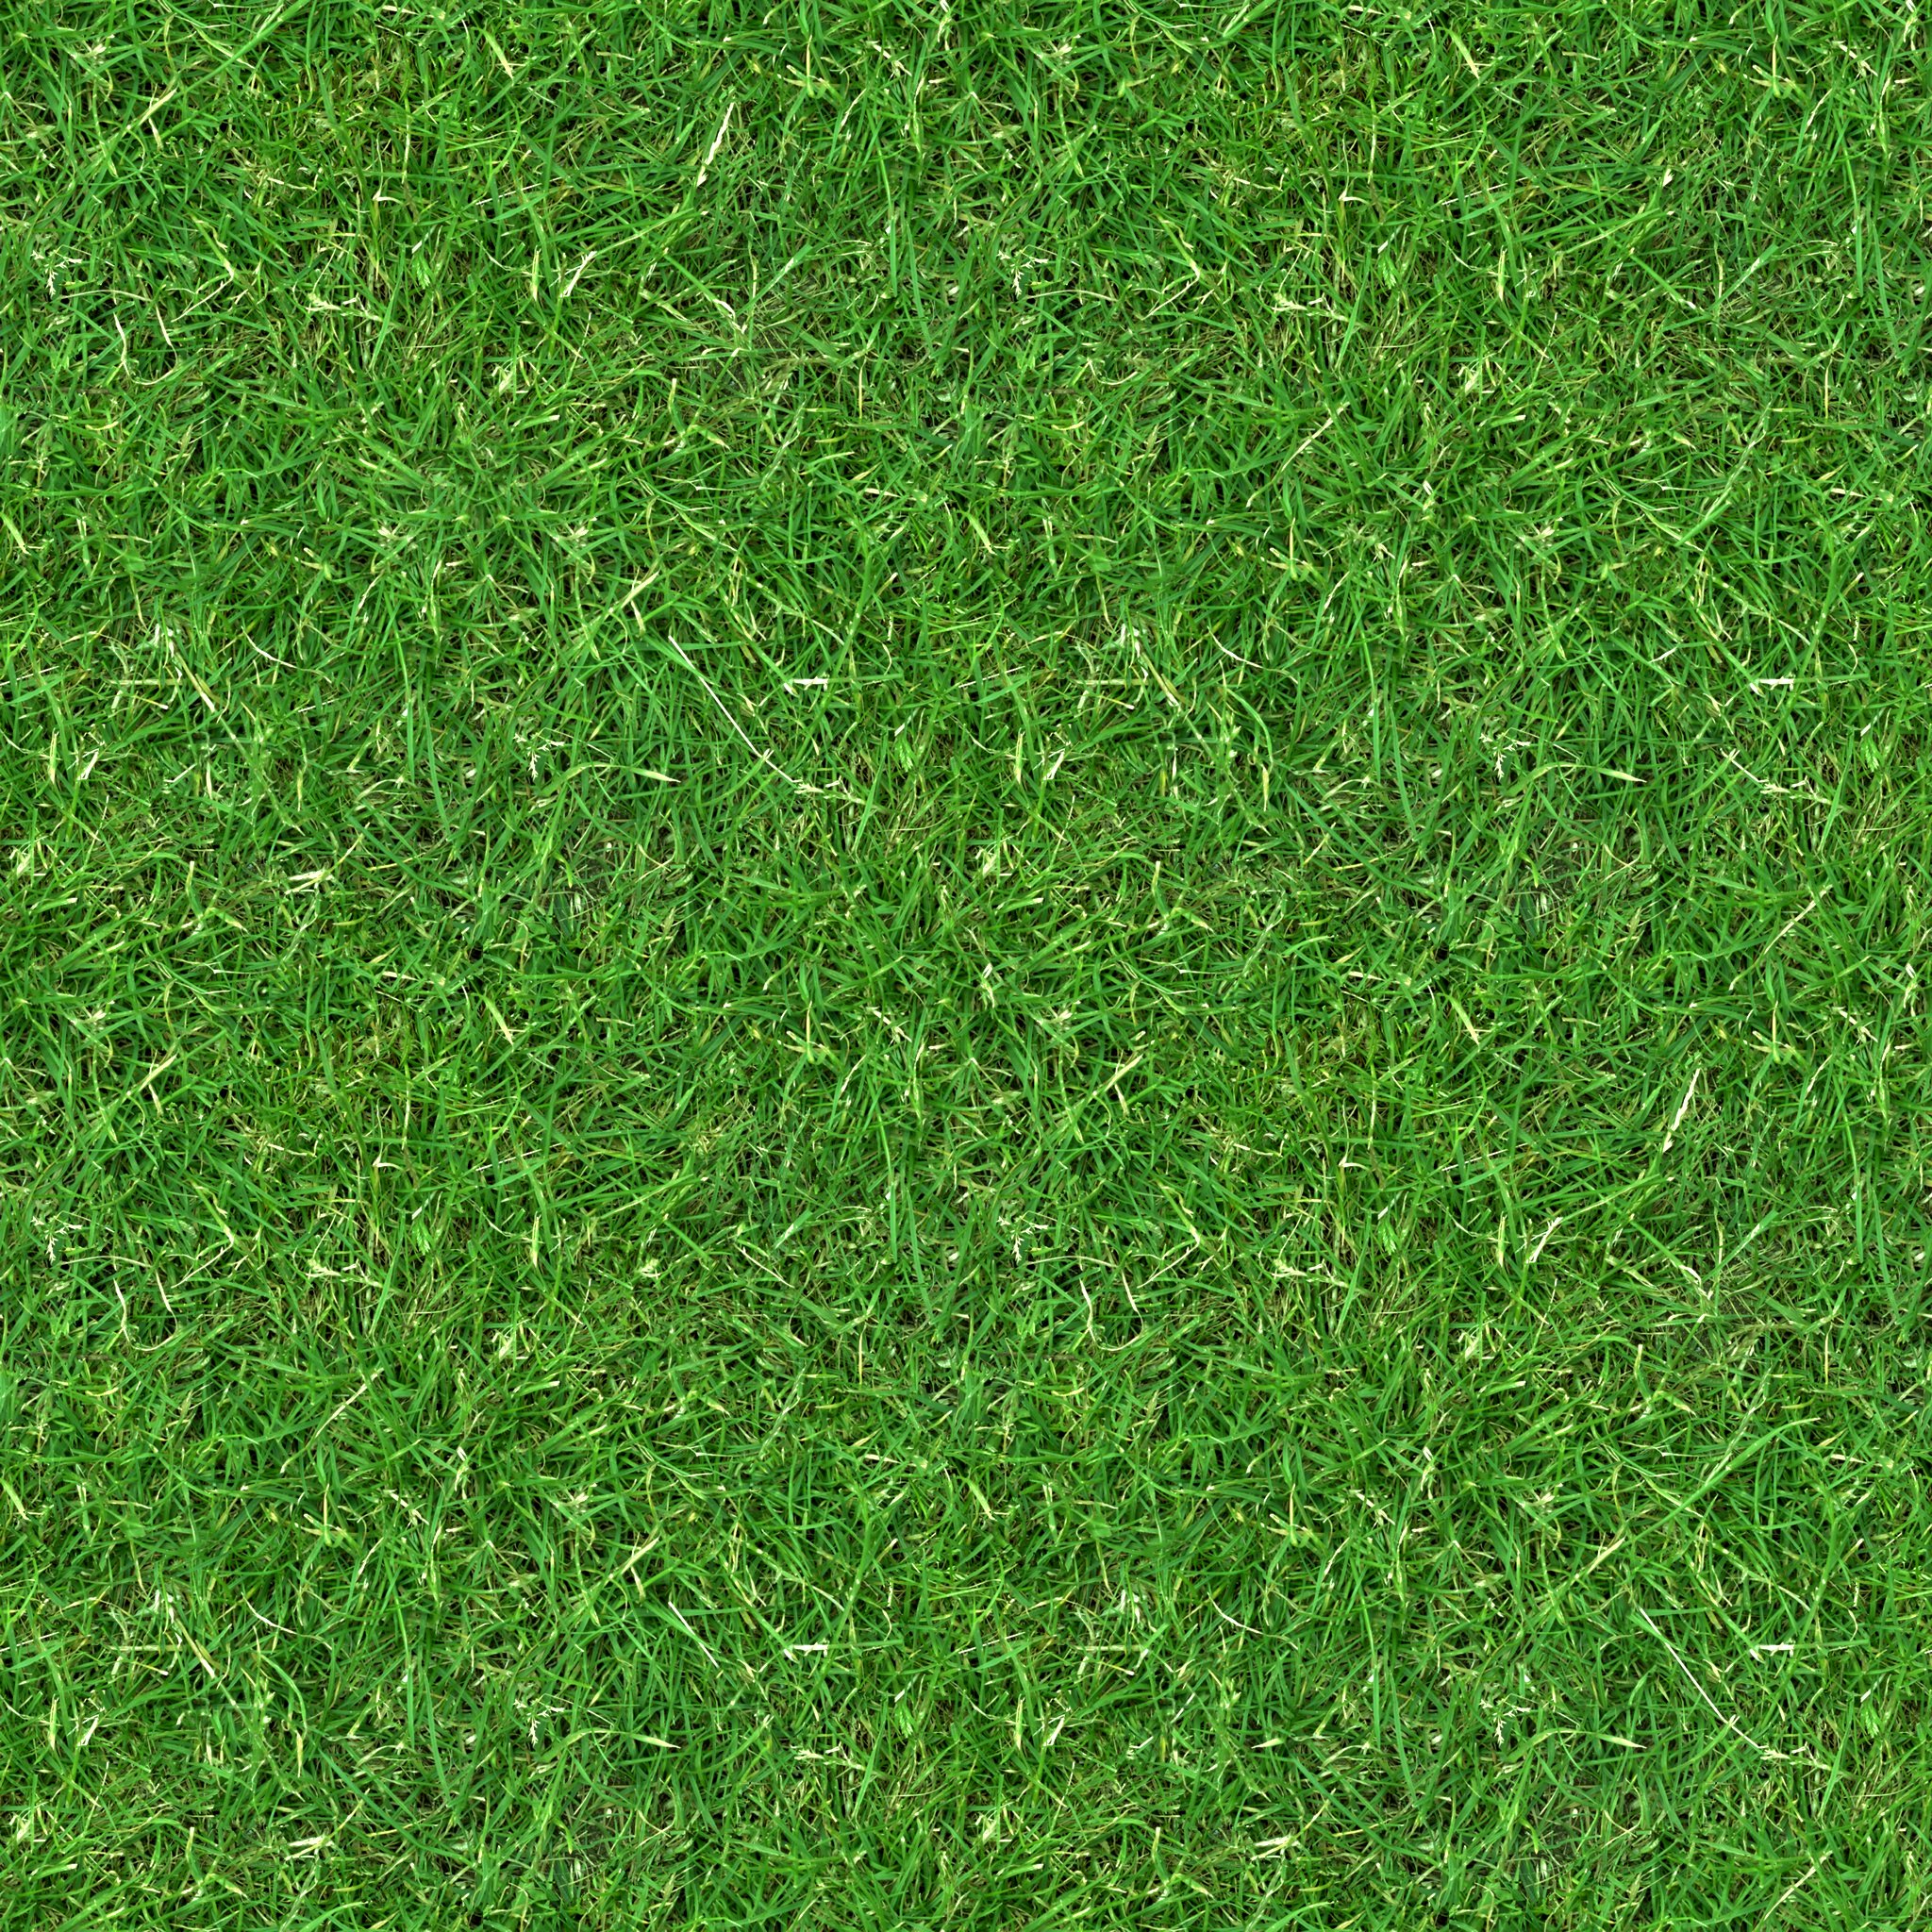 Grass Texture Images Images